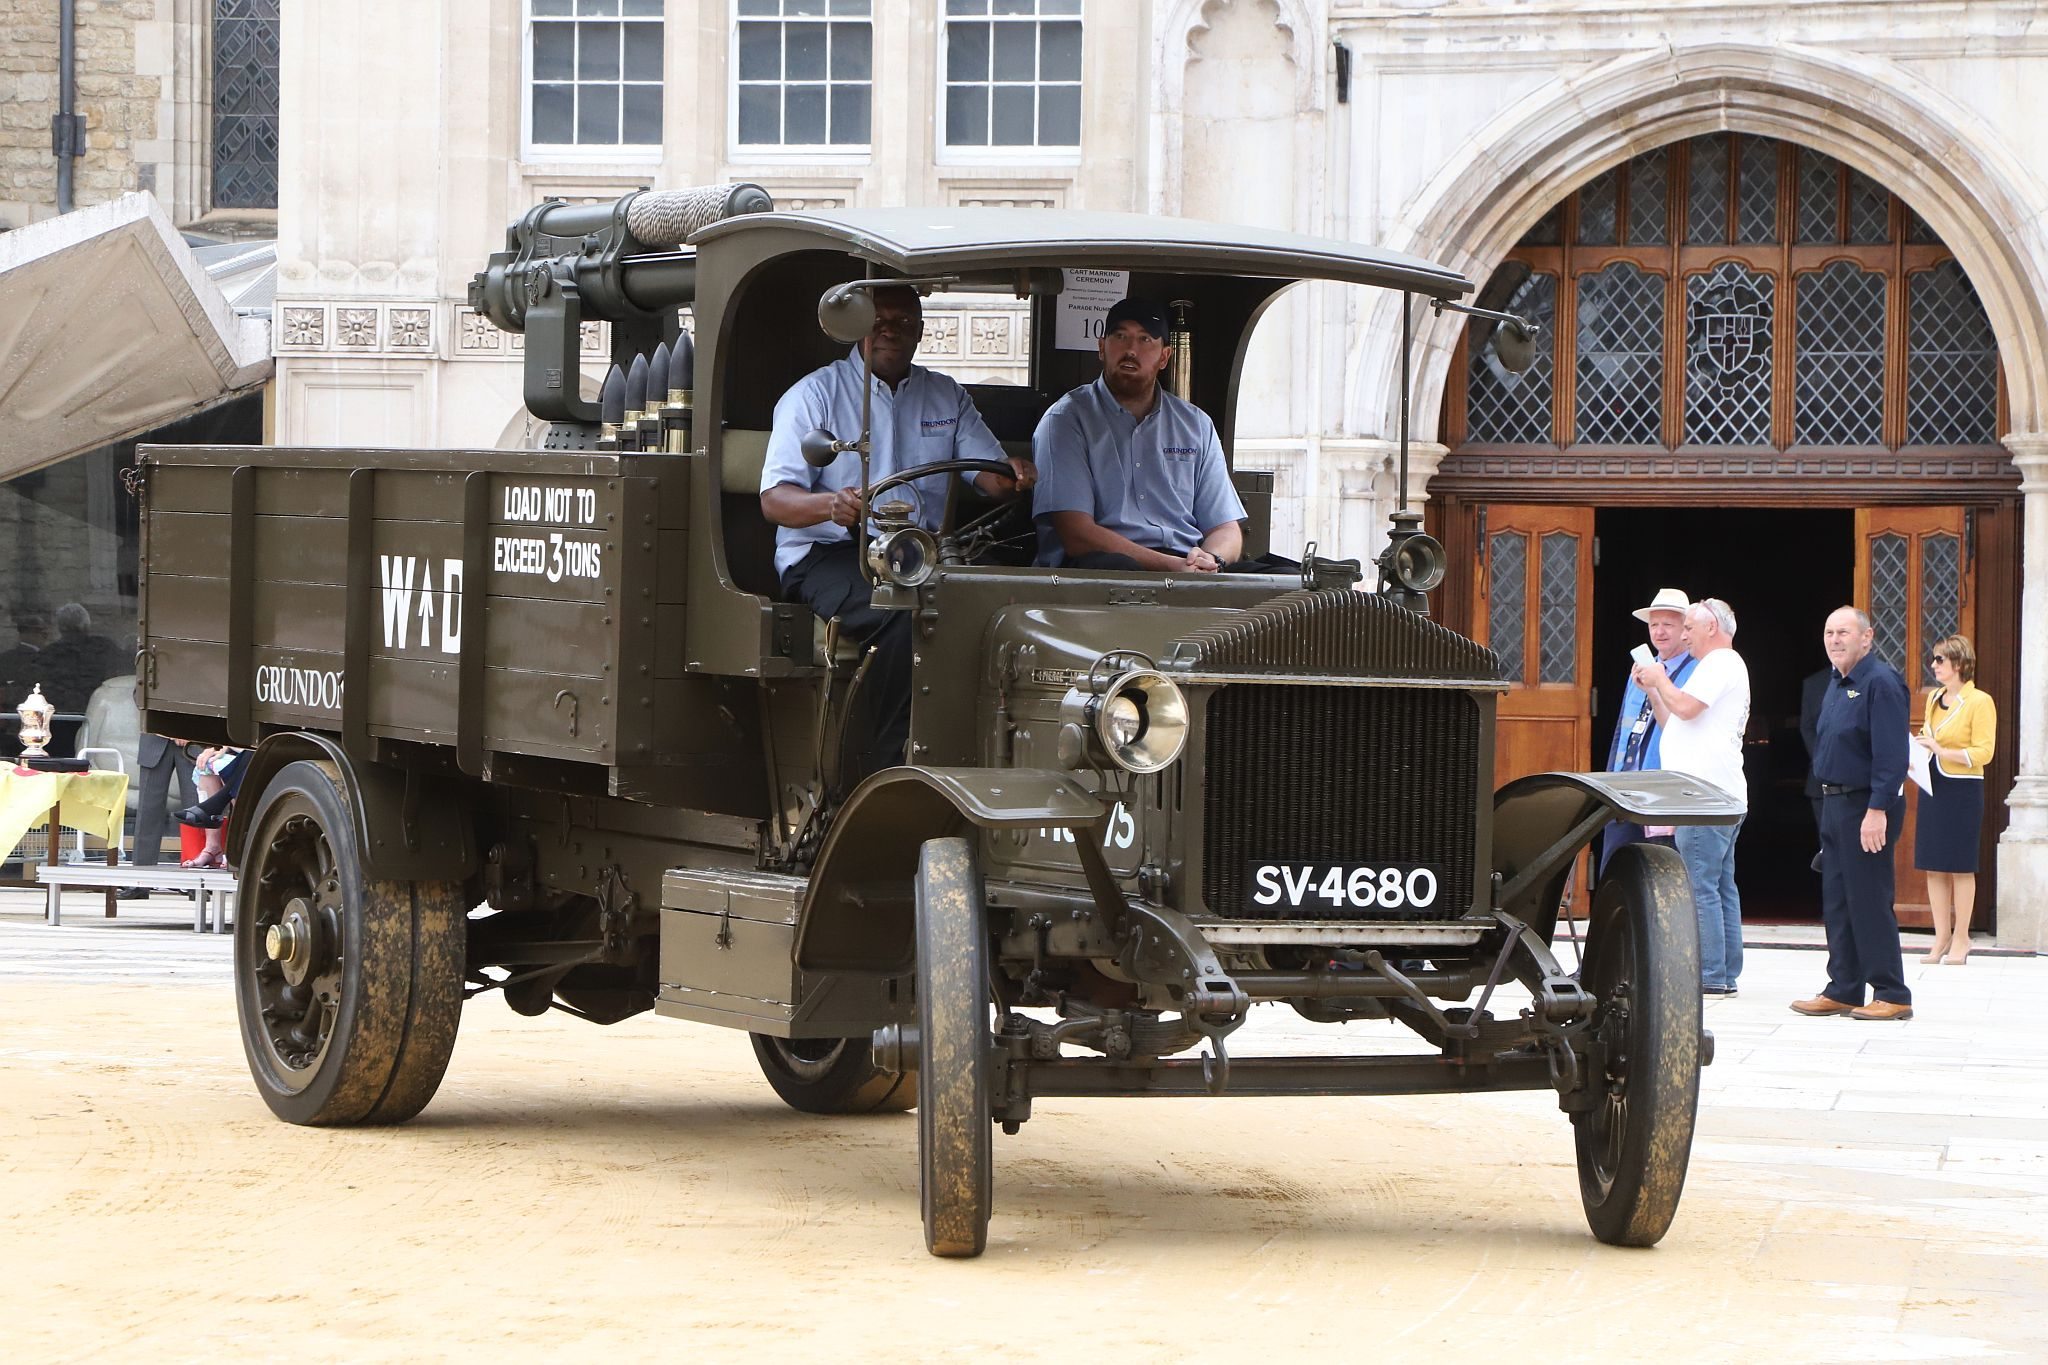 Pierce Arrow 1916 SV4680. City of London 2023 Cart Marking in Guildhall Yard on 22-Jul-2023. Hosted by the Worshipful Company of Carmen with the Lord Mayor of the City of London in attendance. Wooden plates on the vehicles are branded with hot irons to allow them to ply for trade in the Square Mile. Another of the City Livery Company's annual ceremonies.